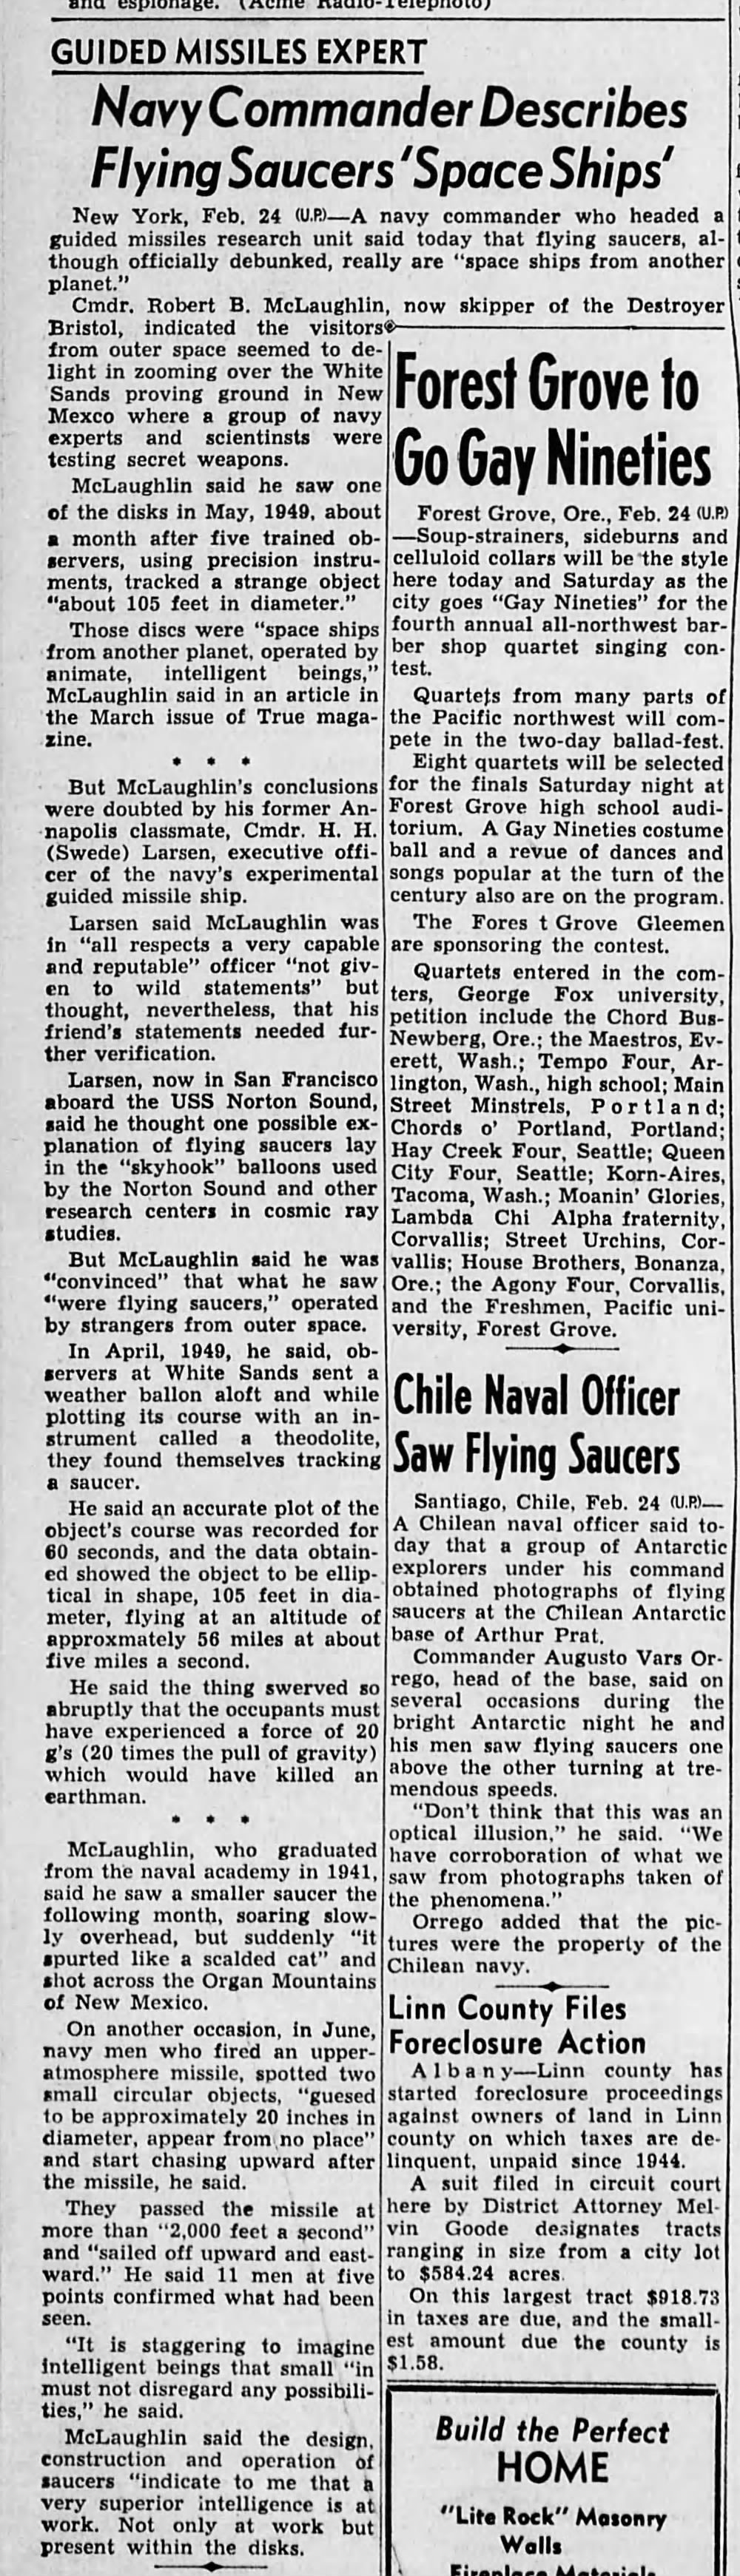 UFO, Flying Saucer, UAP, 24 Feb 1950, US Navy Commander and Chilean Naval Officer-two separate sightings